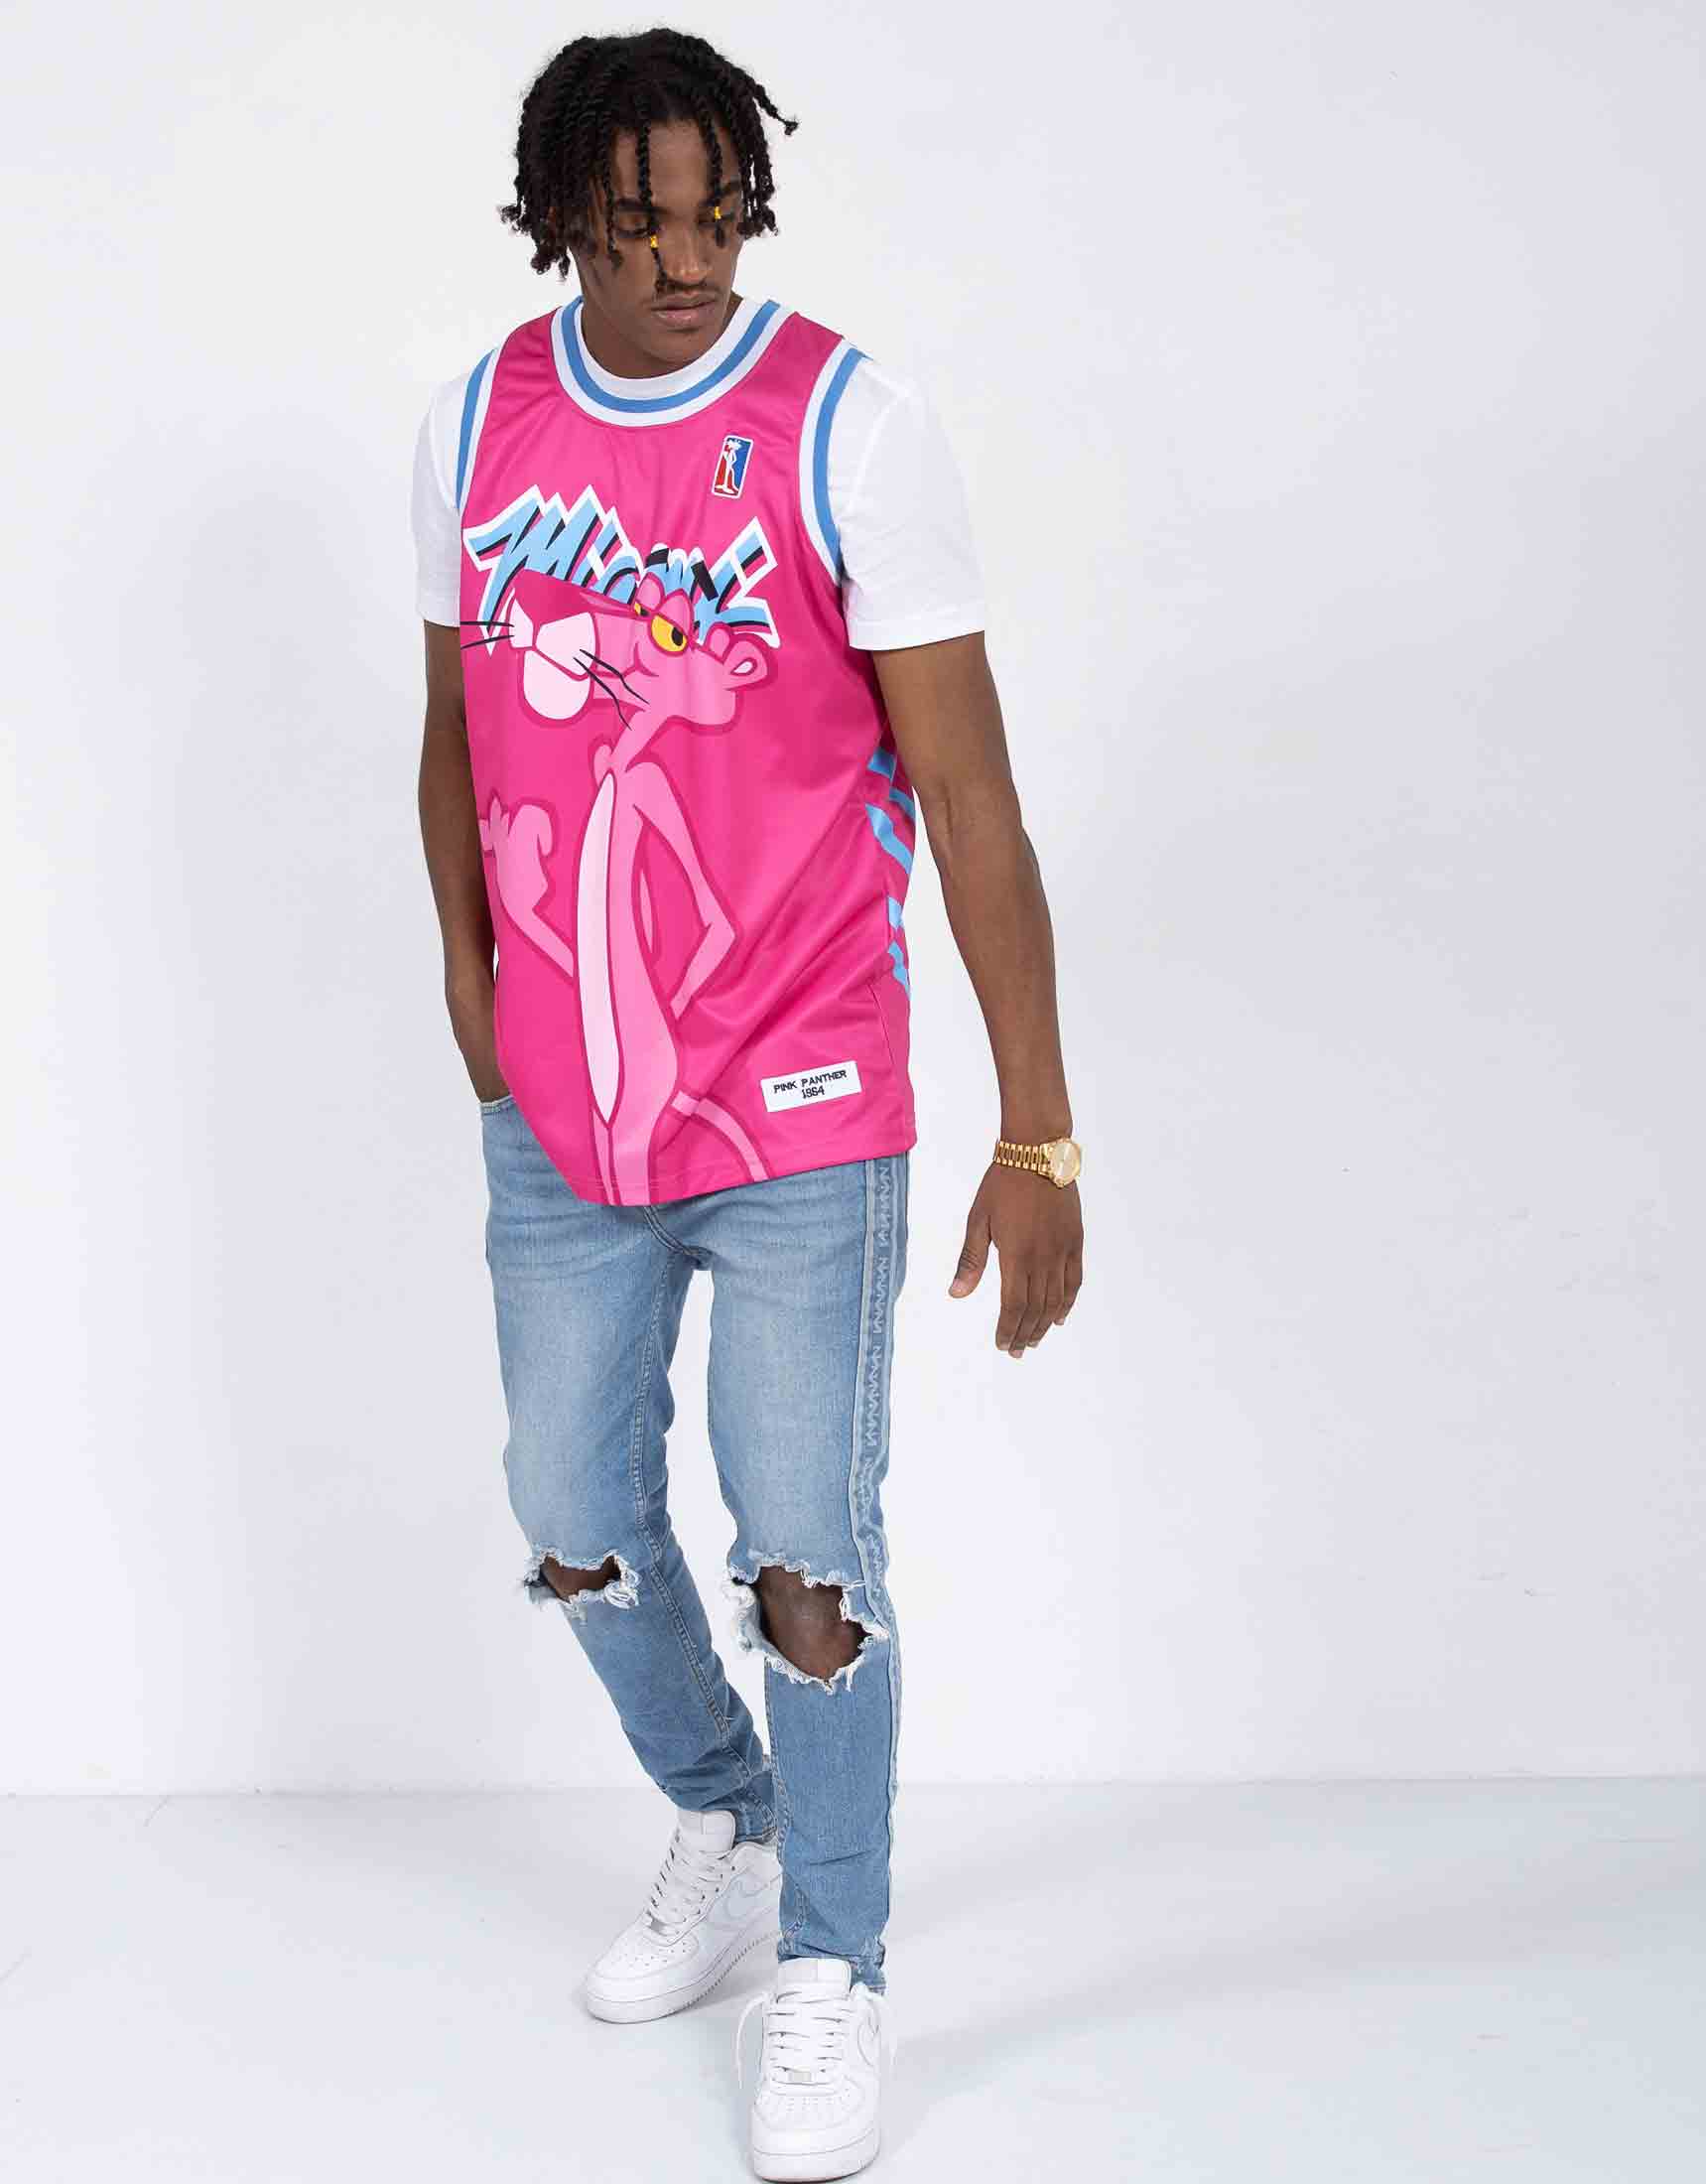 Miami X Pink Panther #3 Basketball Jersey – 99Jersey®: Your